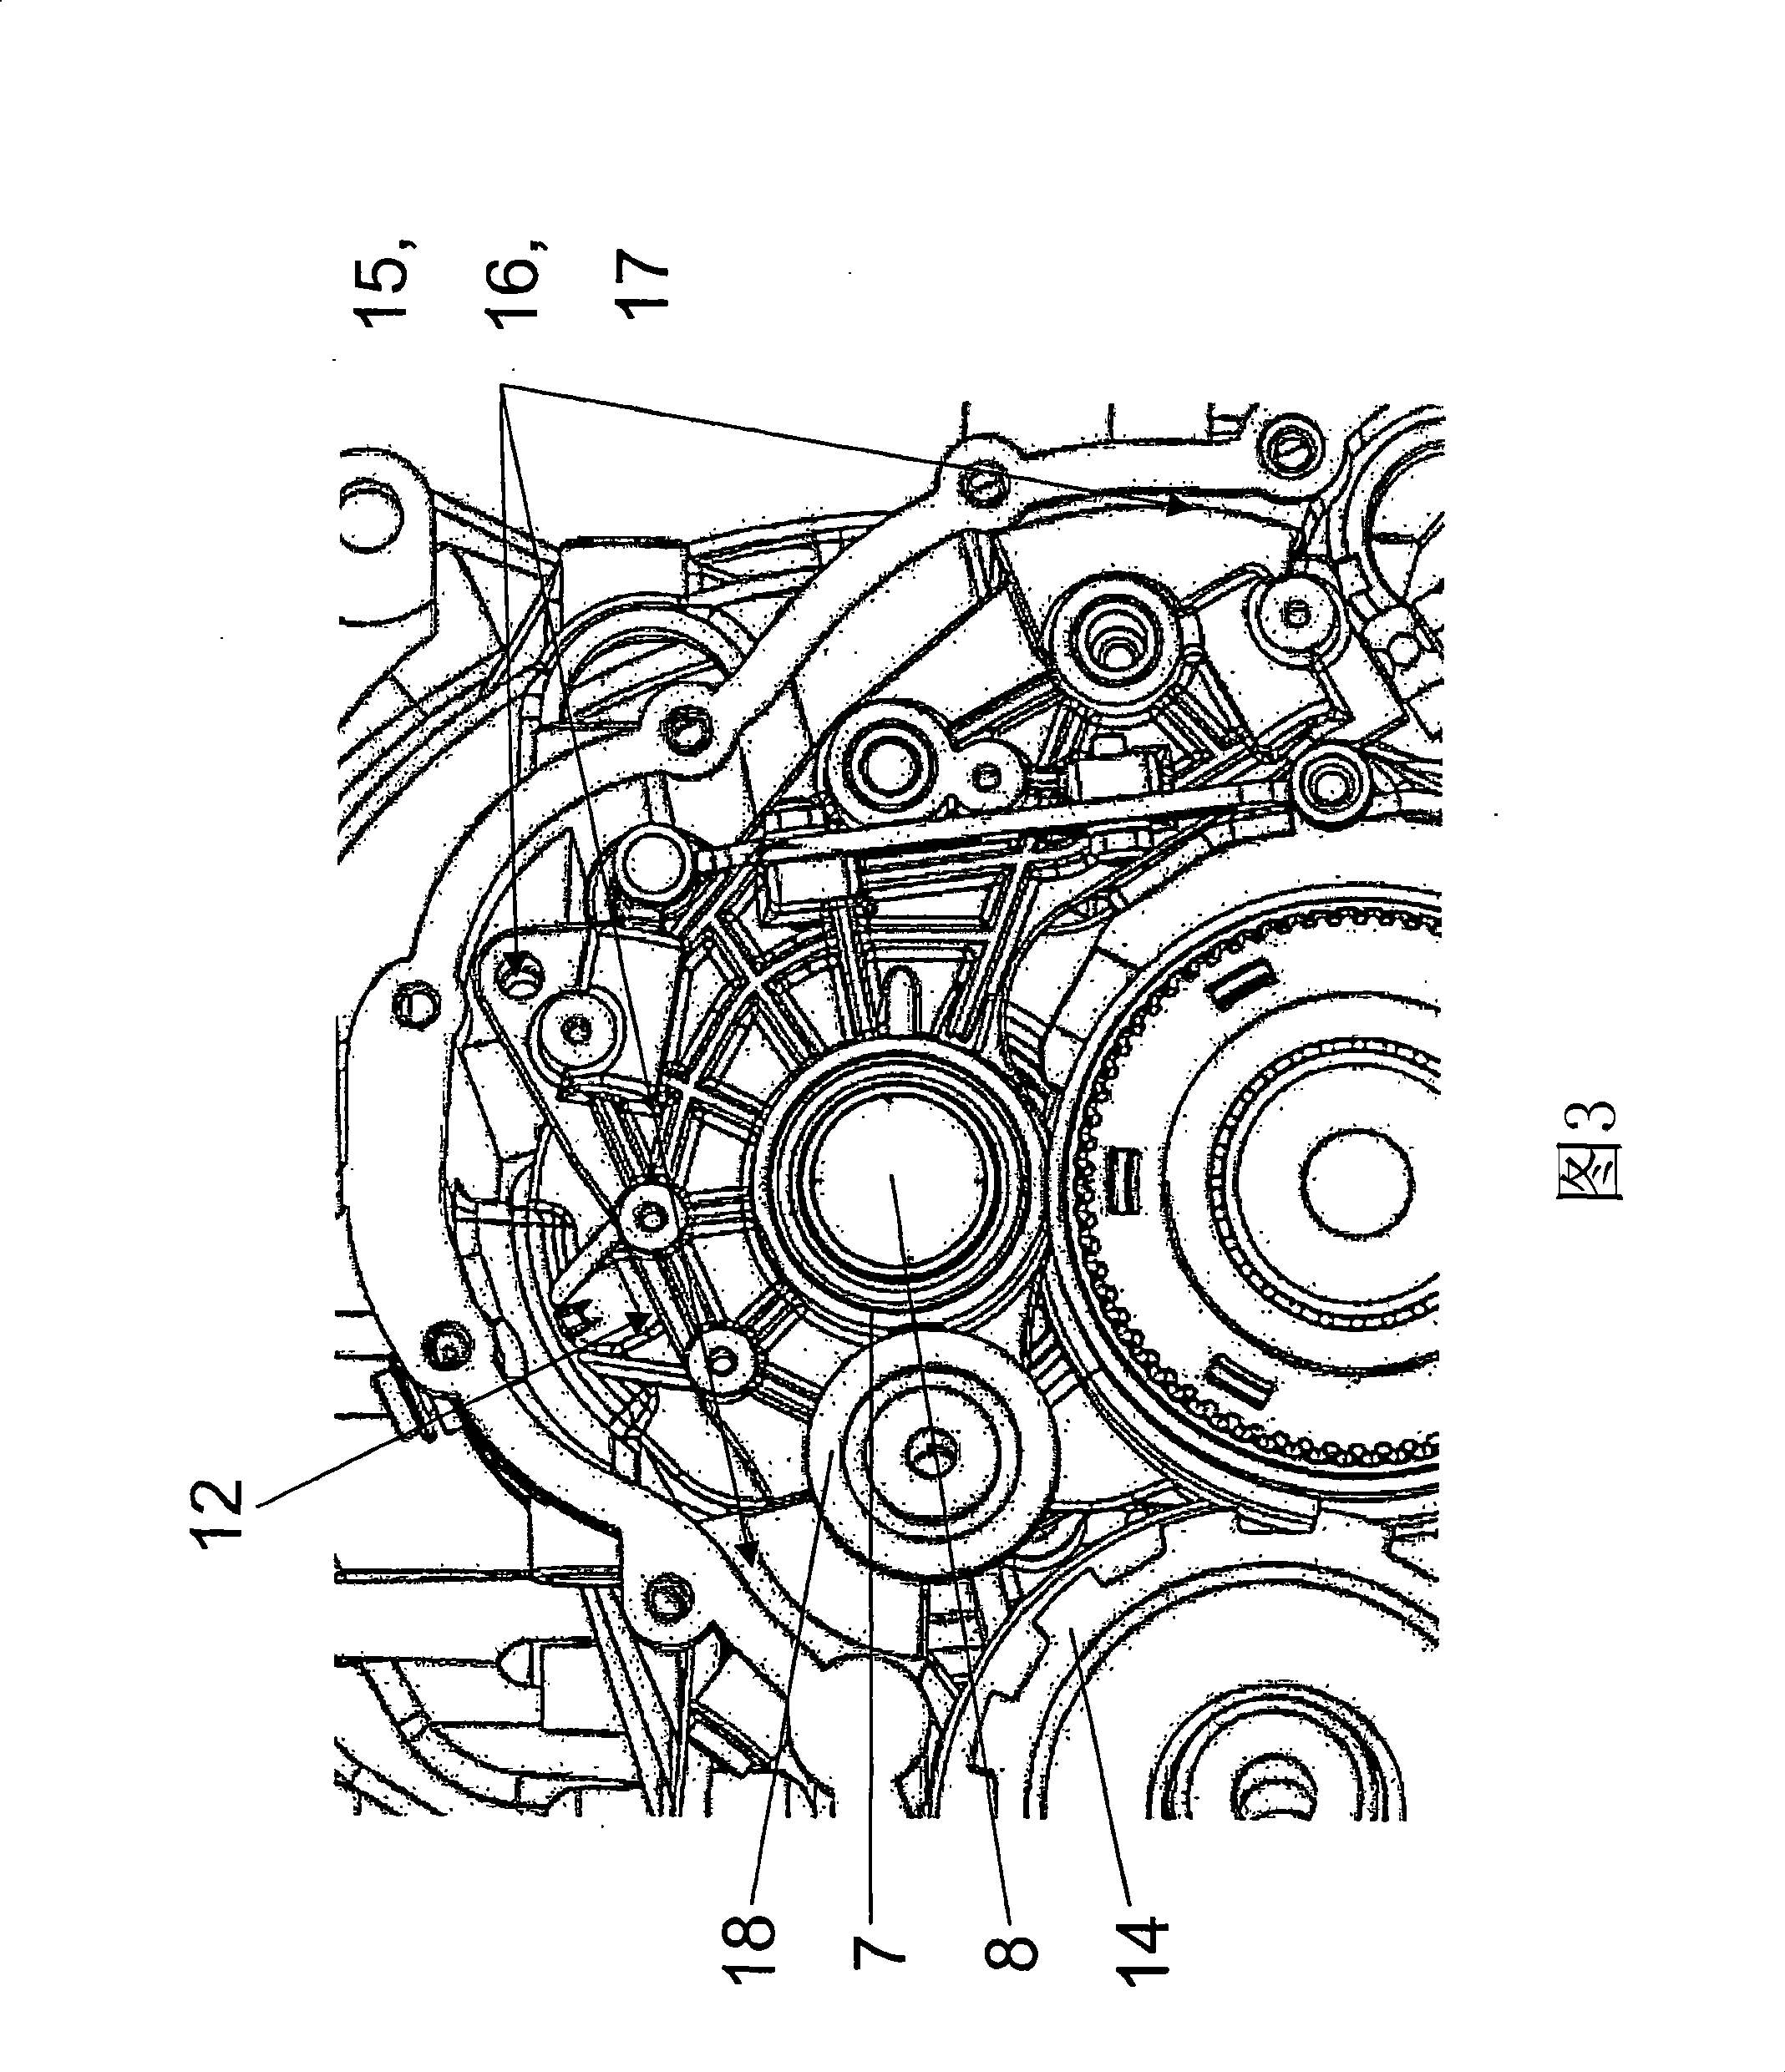 Dual clutch transmission of a motor vehicle